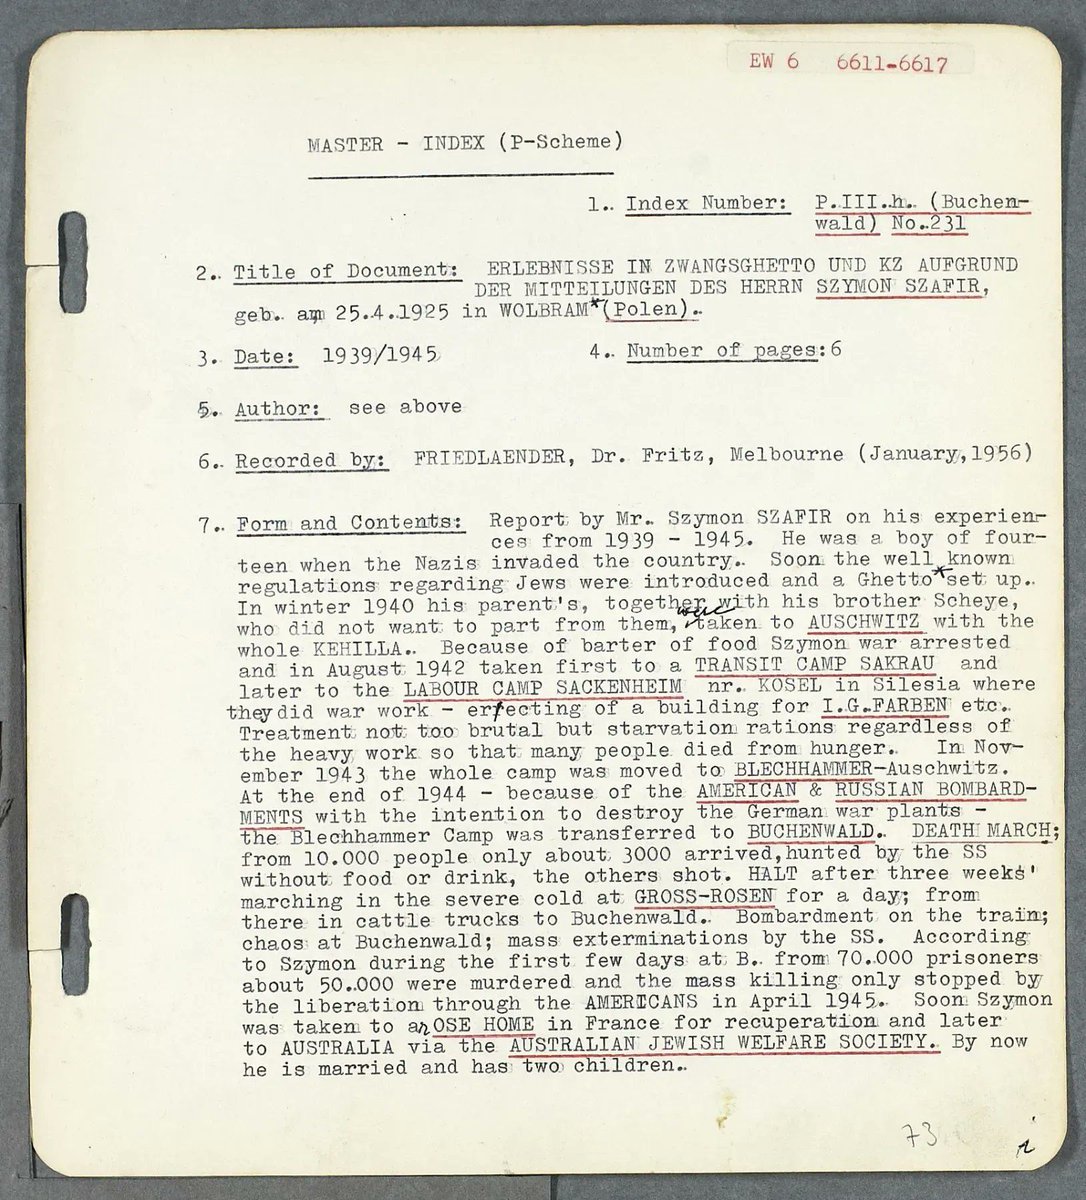 'Chaos at Buchenwald; mass exterminations by the SS.' #OnThisDay in 1945, Szymon Szafir was liberated from Buchenwald by the US Army. In the weeks leading up to liberation, 50,000 prisoners were murdered. He gave this testimony to the Library in 1956 bit.ly/37b6595